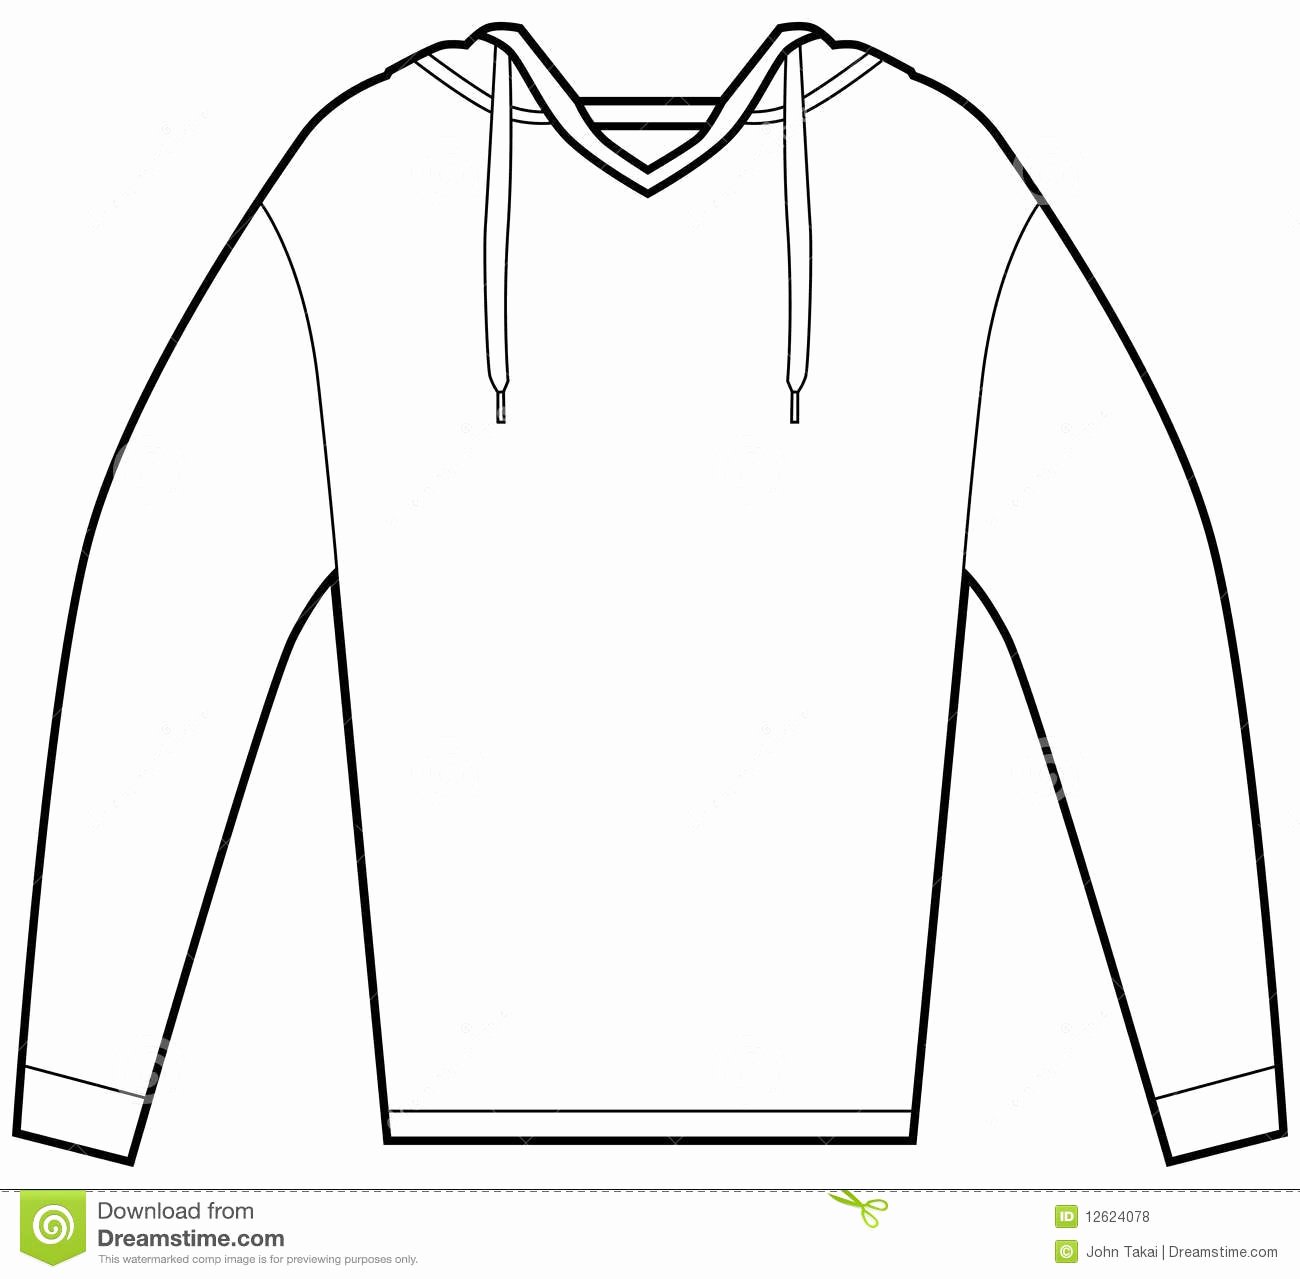 Hooded Sweatshirt Template Awesome 1 4 Sweatshirt Clipart Clipart Suggest